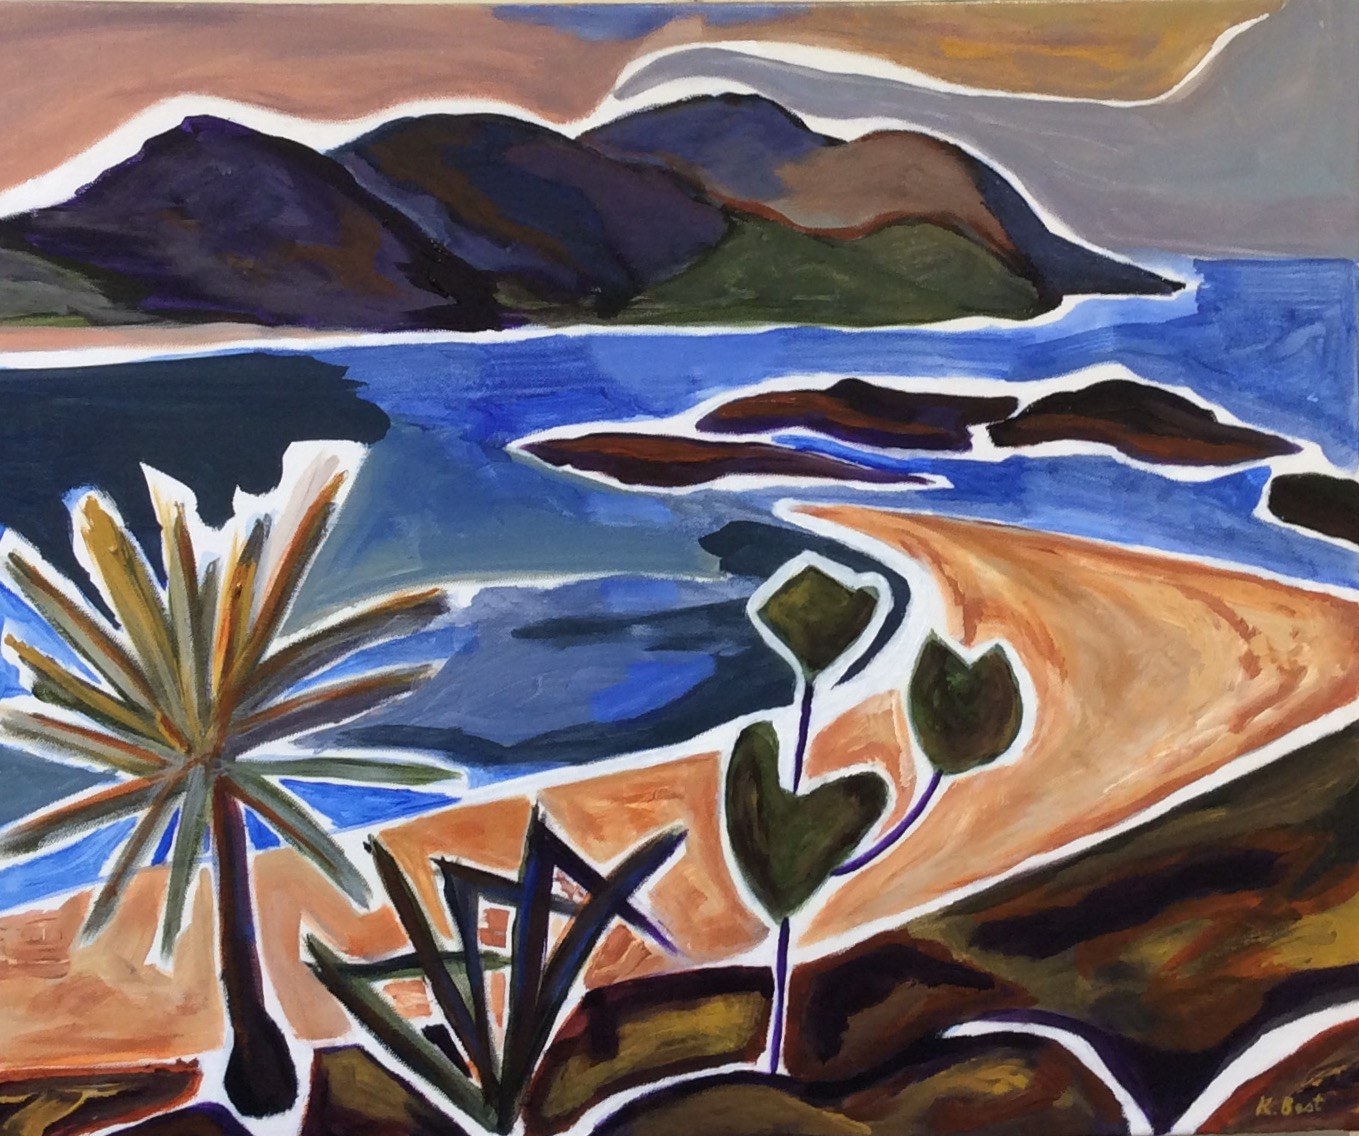 Three Plants and a Bay - Kathy Best